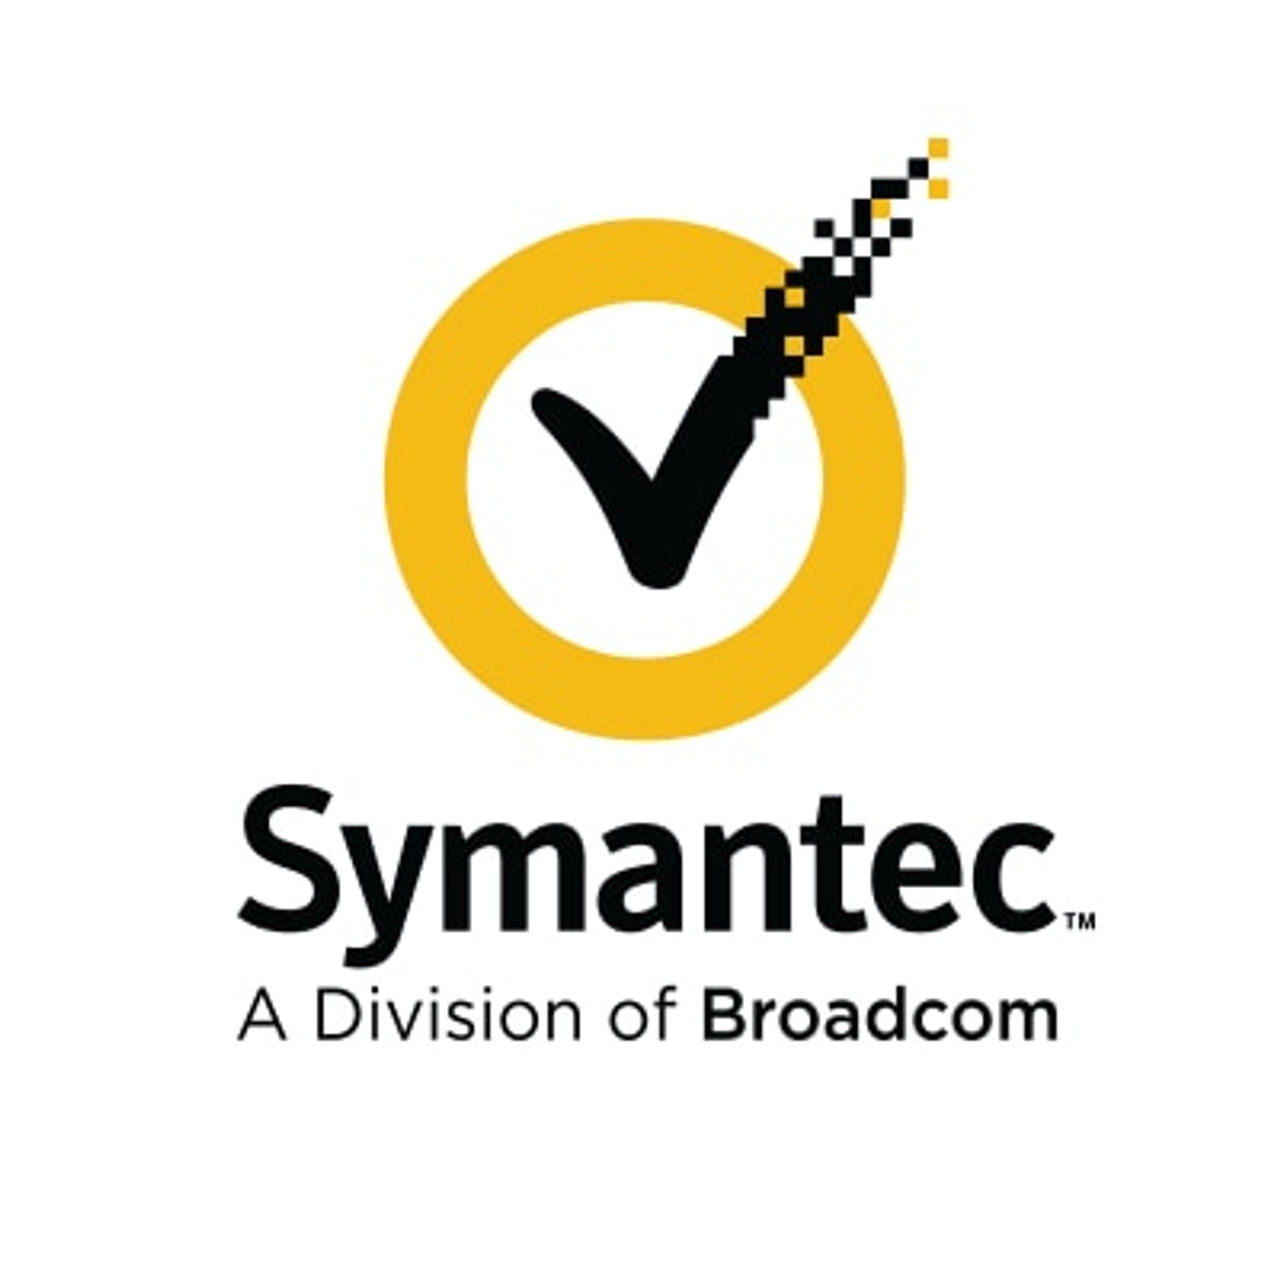 Symantec Advanced Endpoint Defense (with SEP), Initial Hybrid Subscription License with Support, 50-99 Devices 1 YR